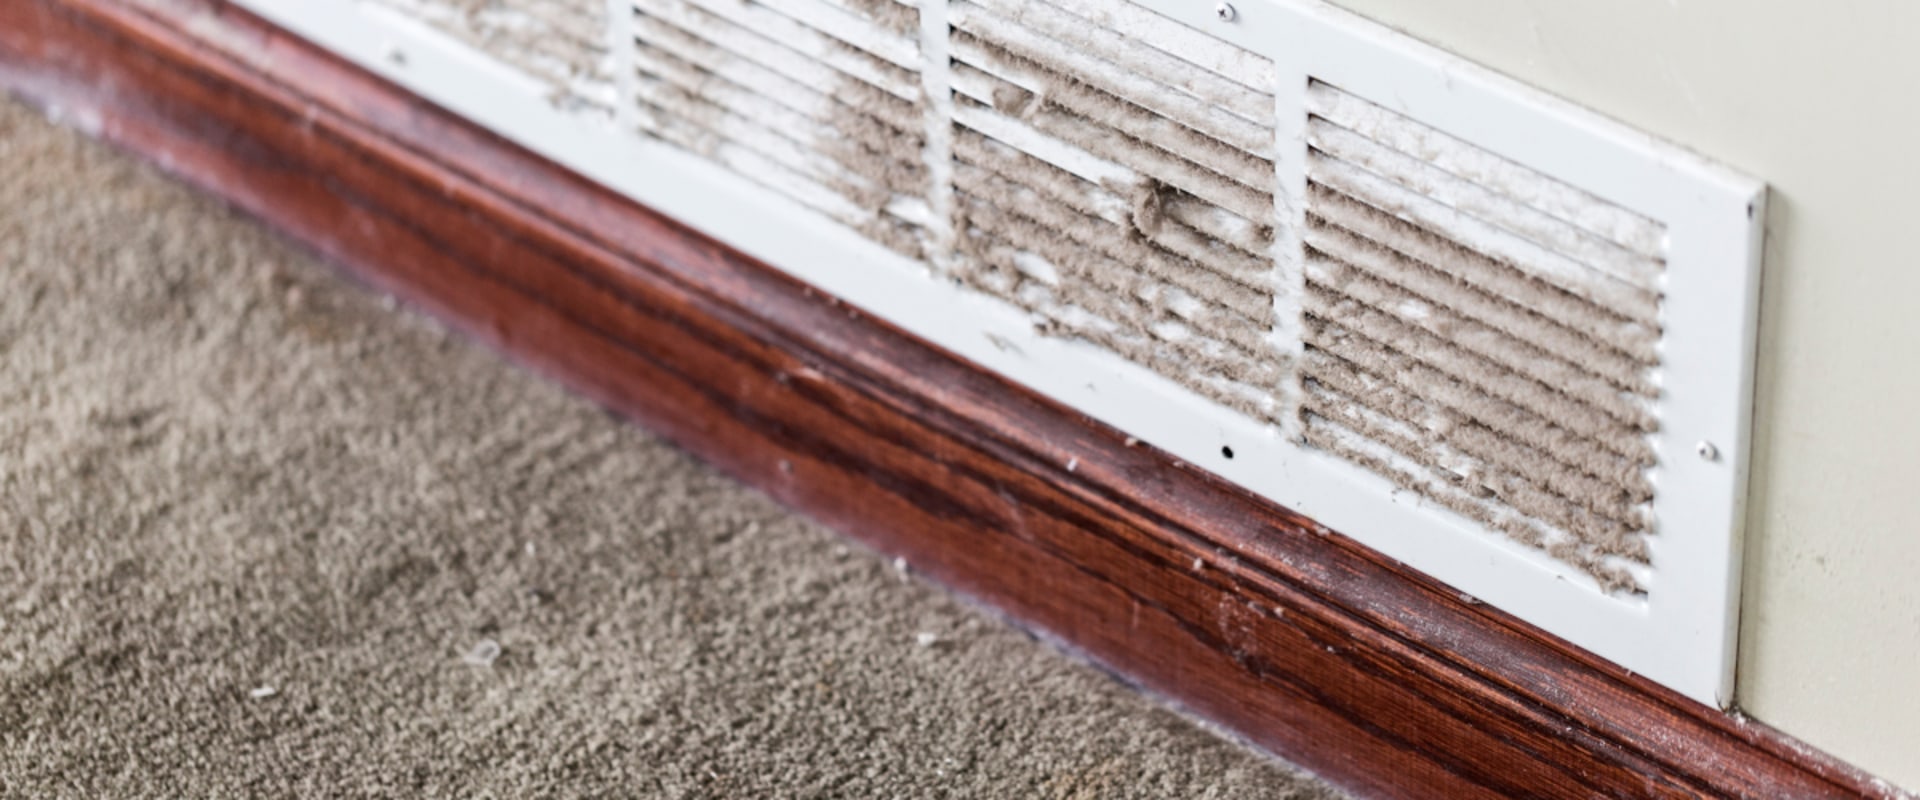 Cleaning Air Ducts and Vents: A Step-by-Step Guide